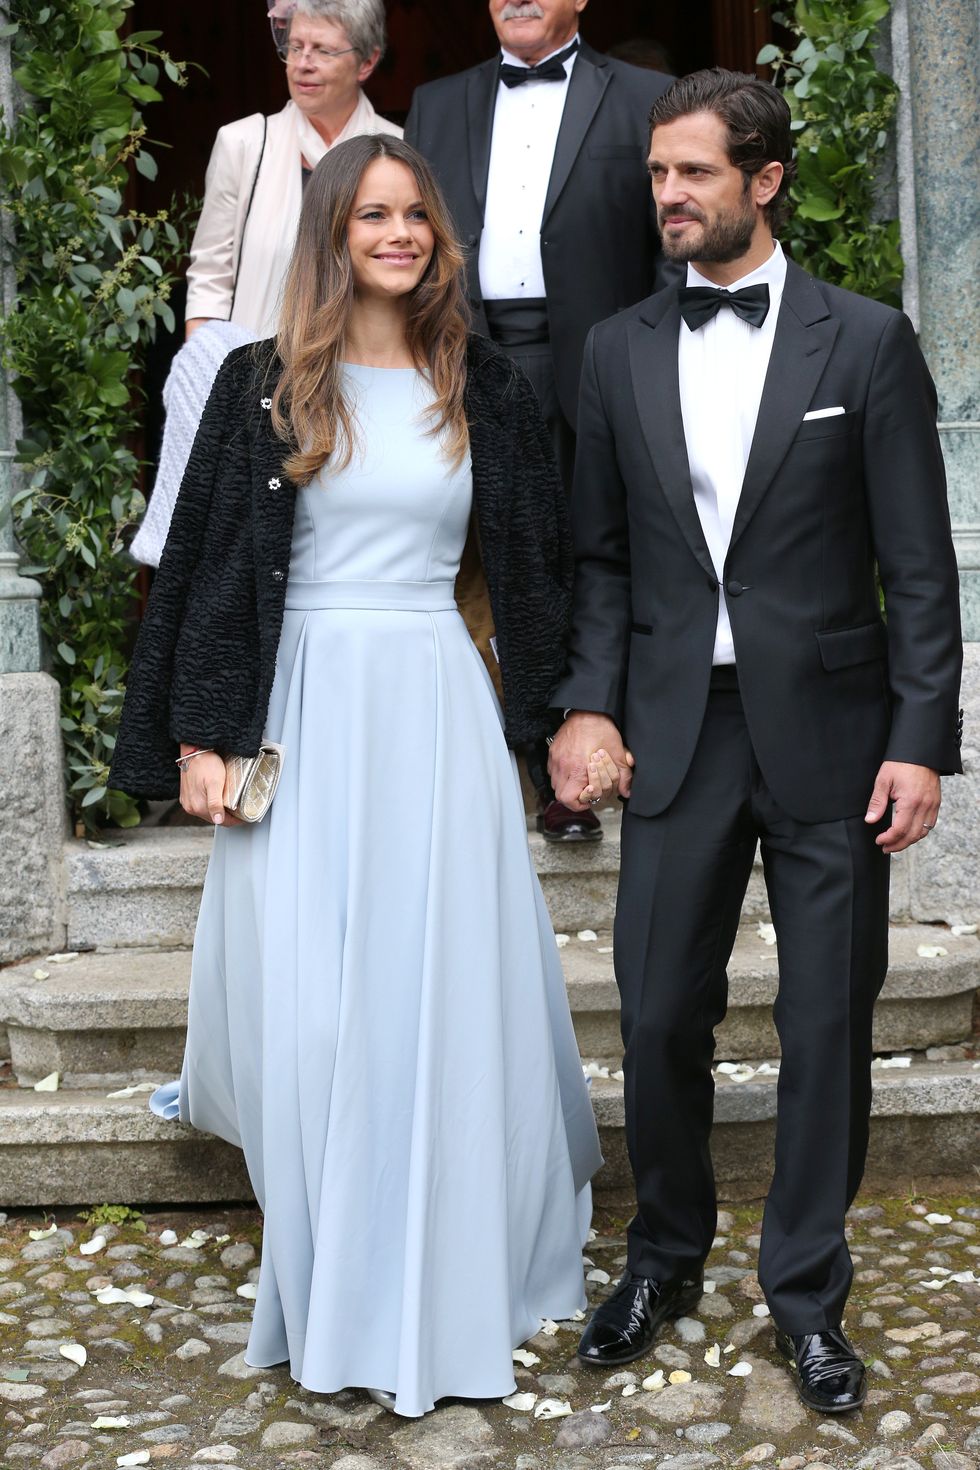 who were the notable guests at Prince Dushan and Princess Sofia's wedding